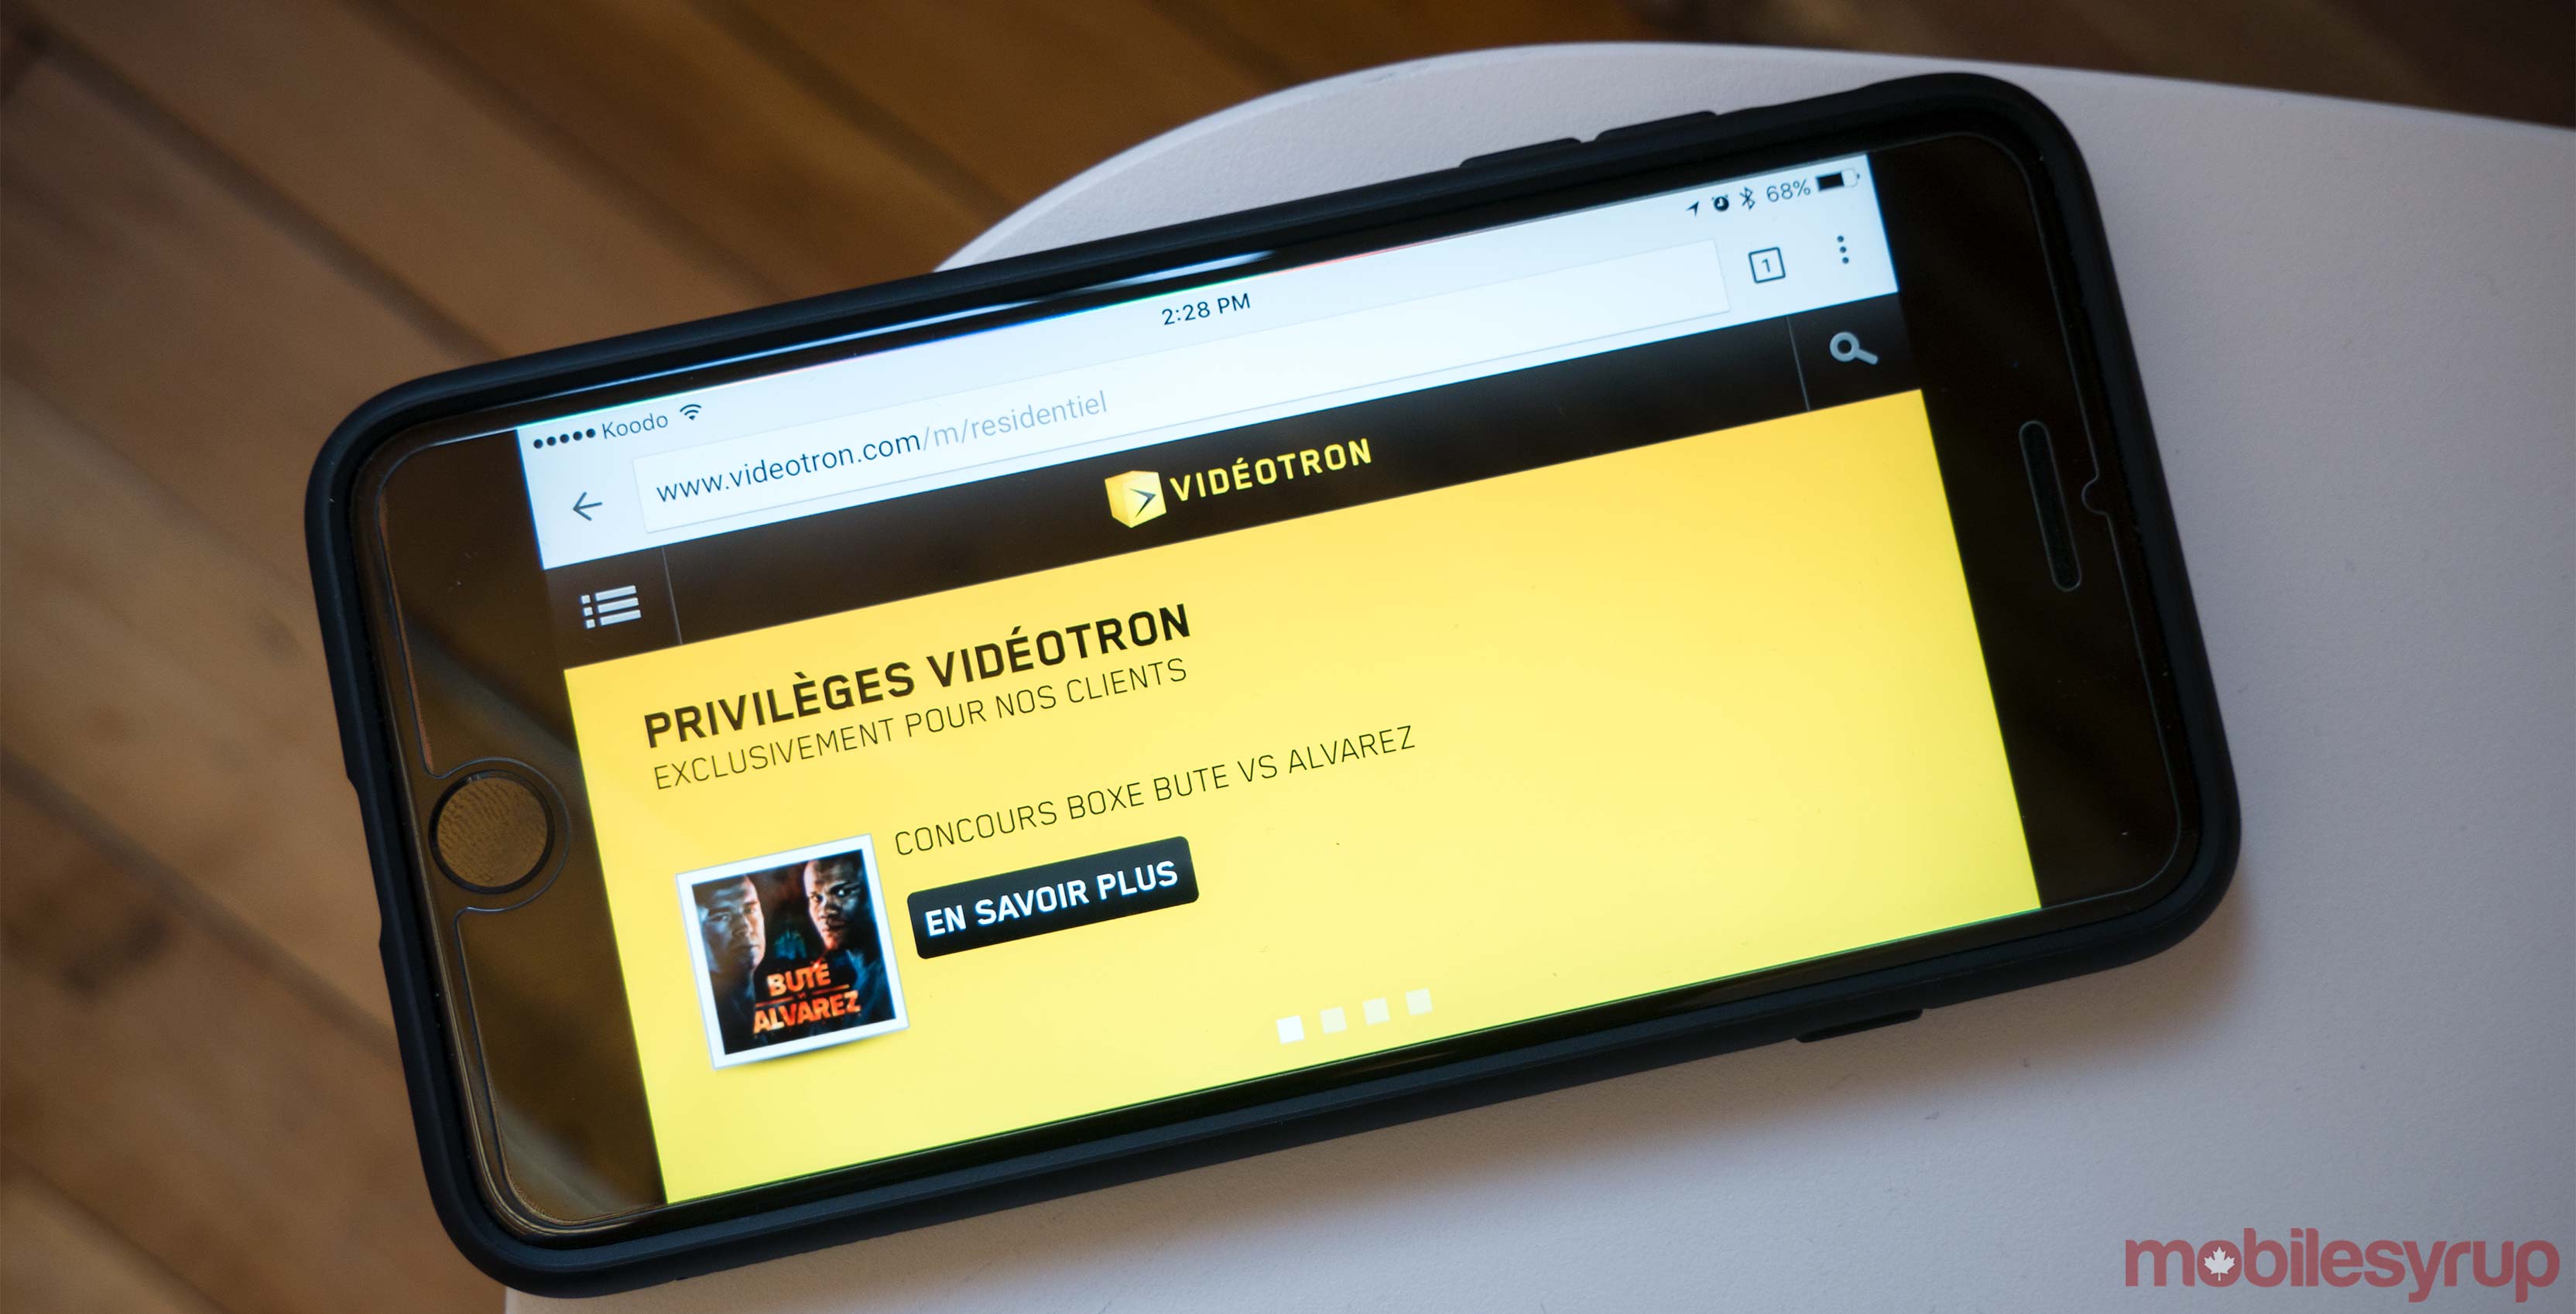 An image showing a Videotron webpage on an iPhone